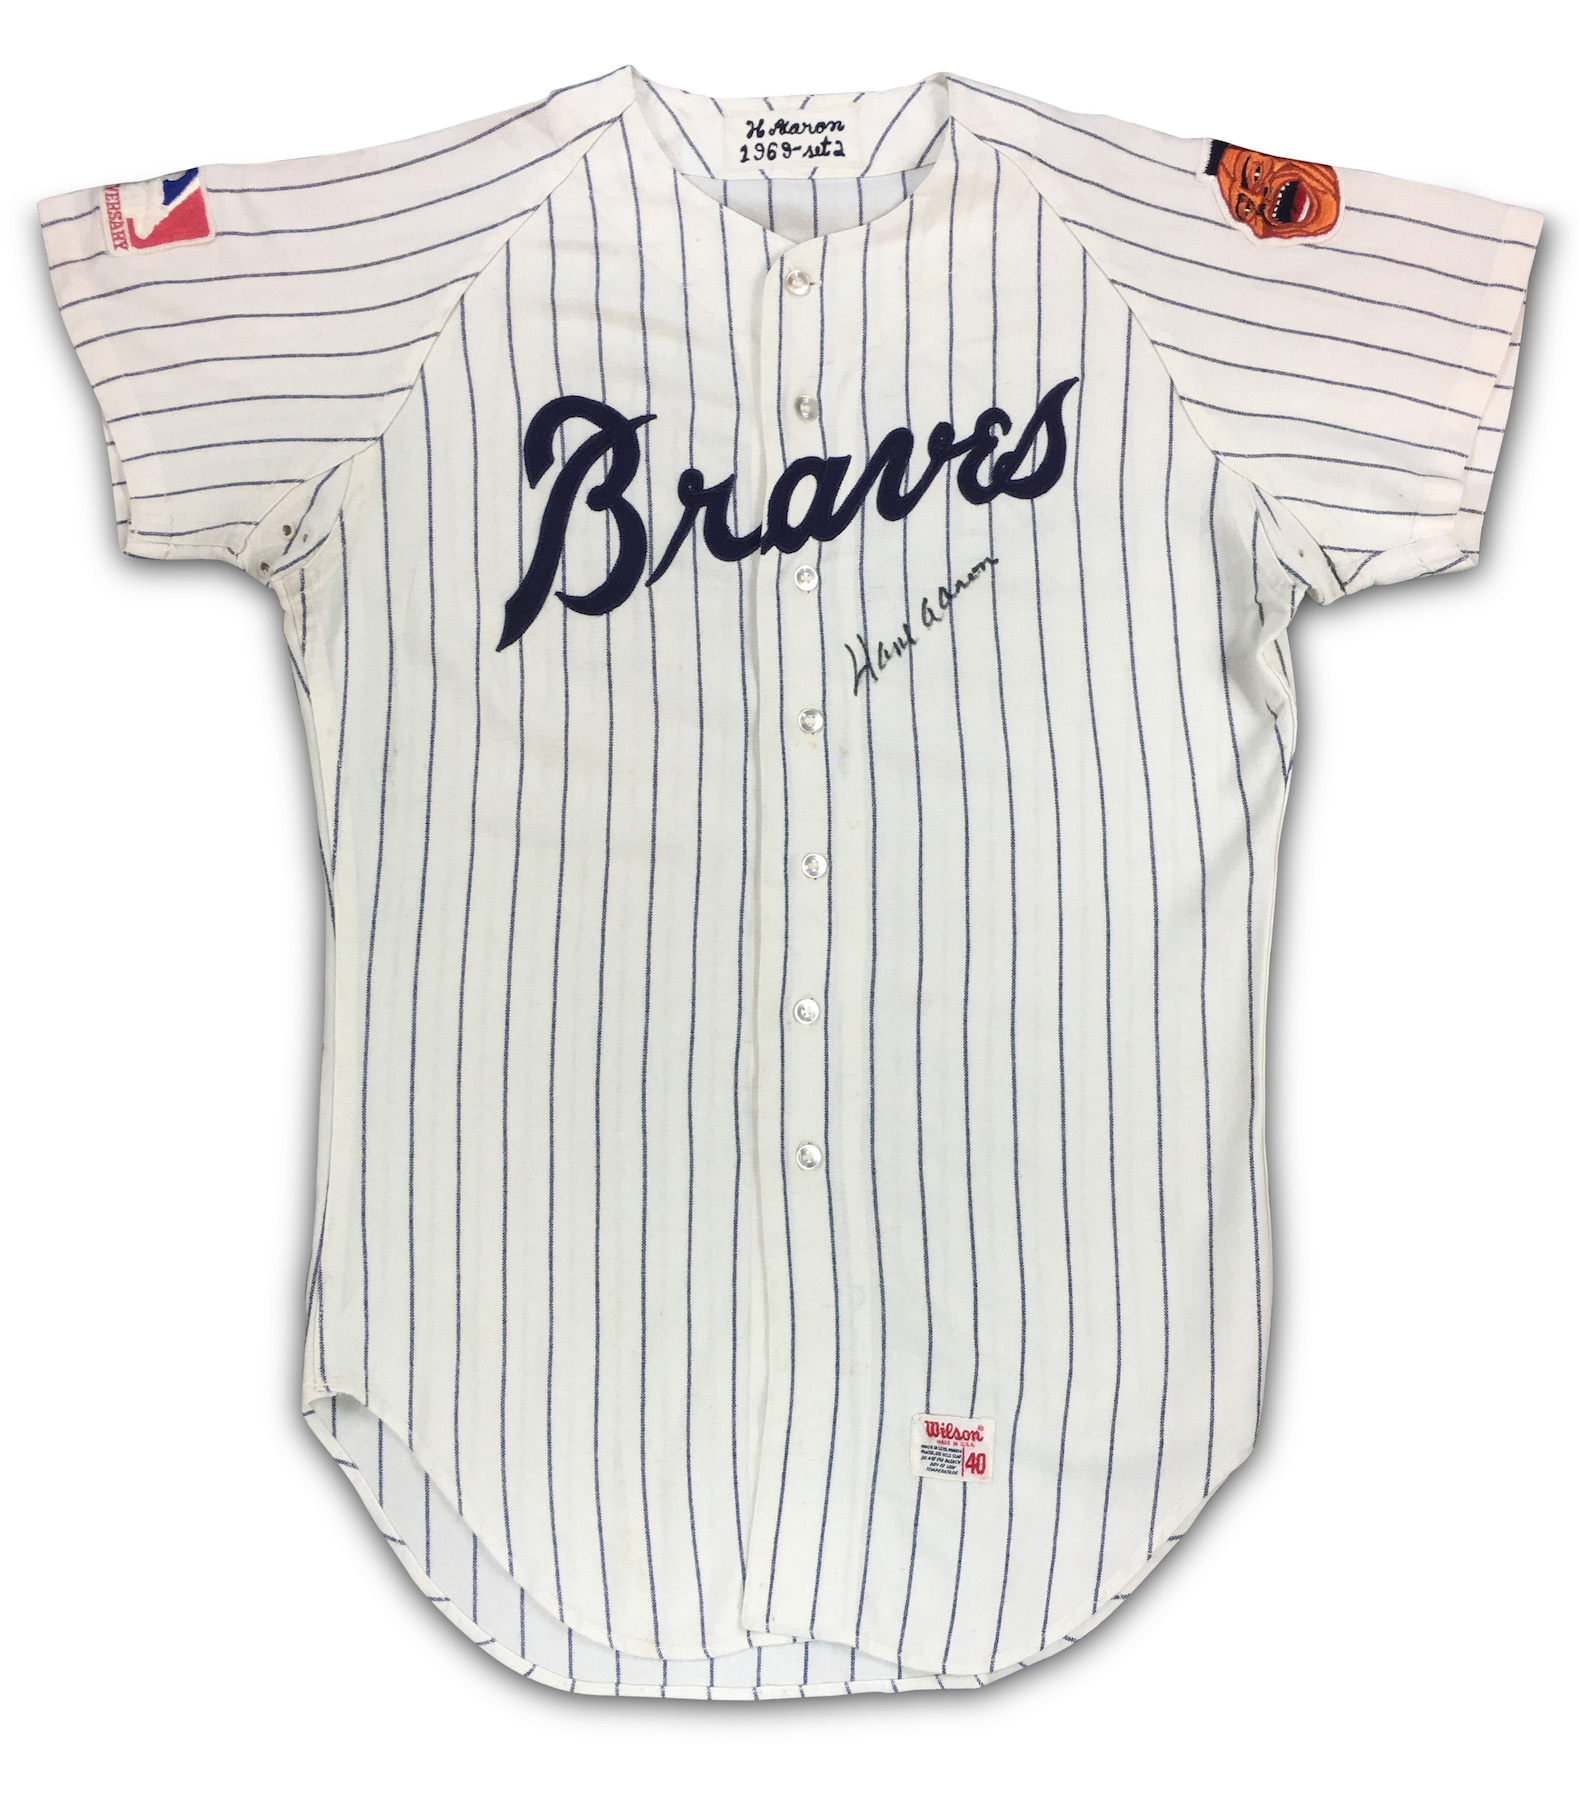 Jersey for the Atlanta Braves worn and autographed by Hank Aaron